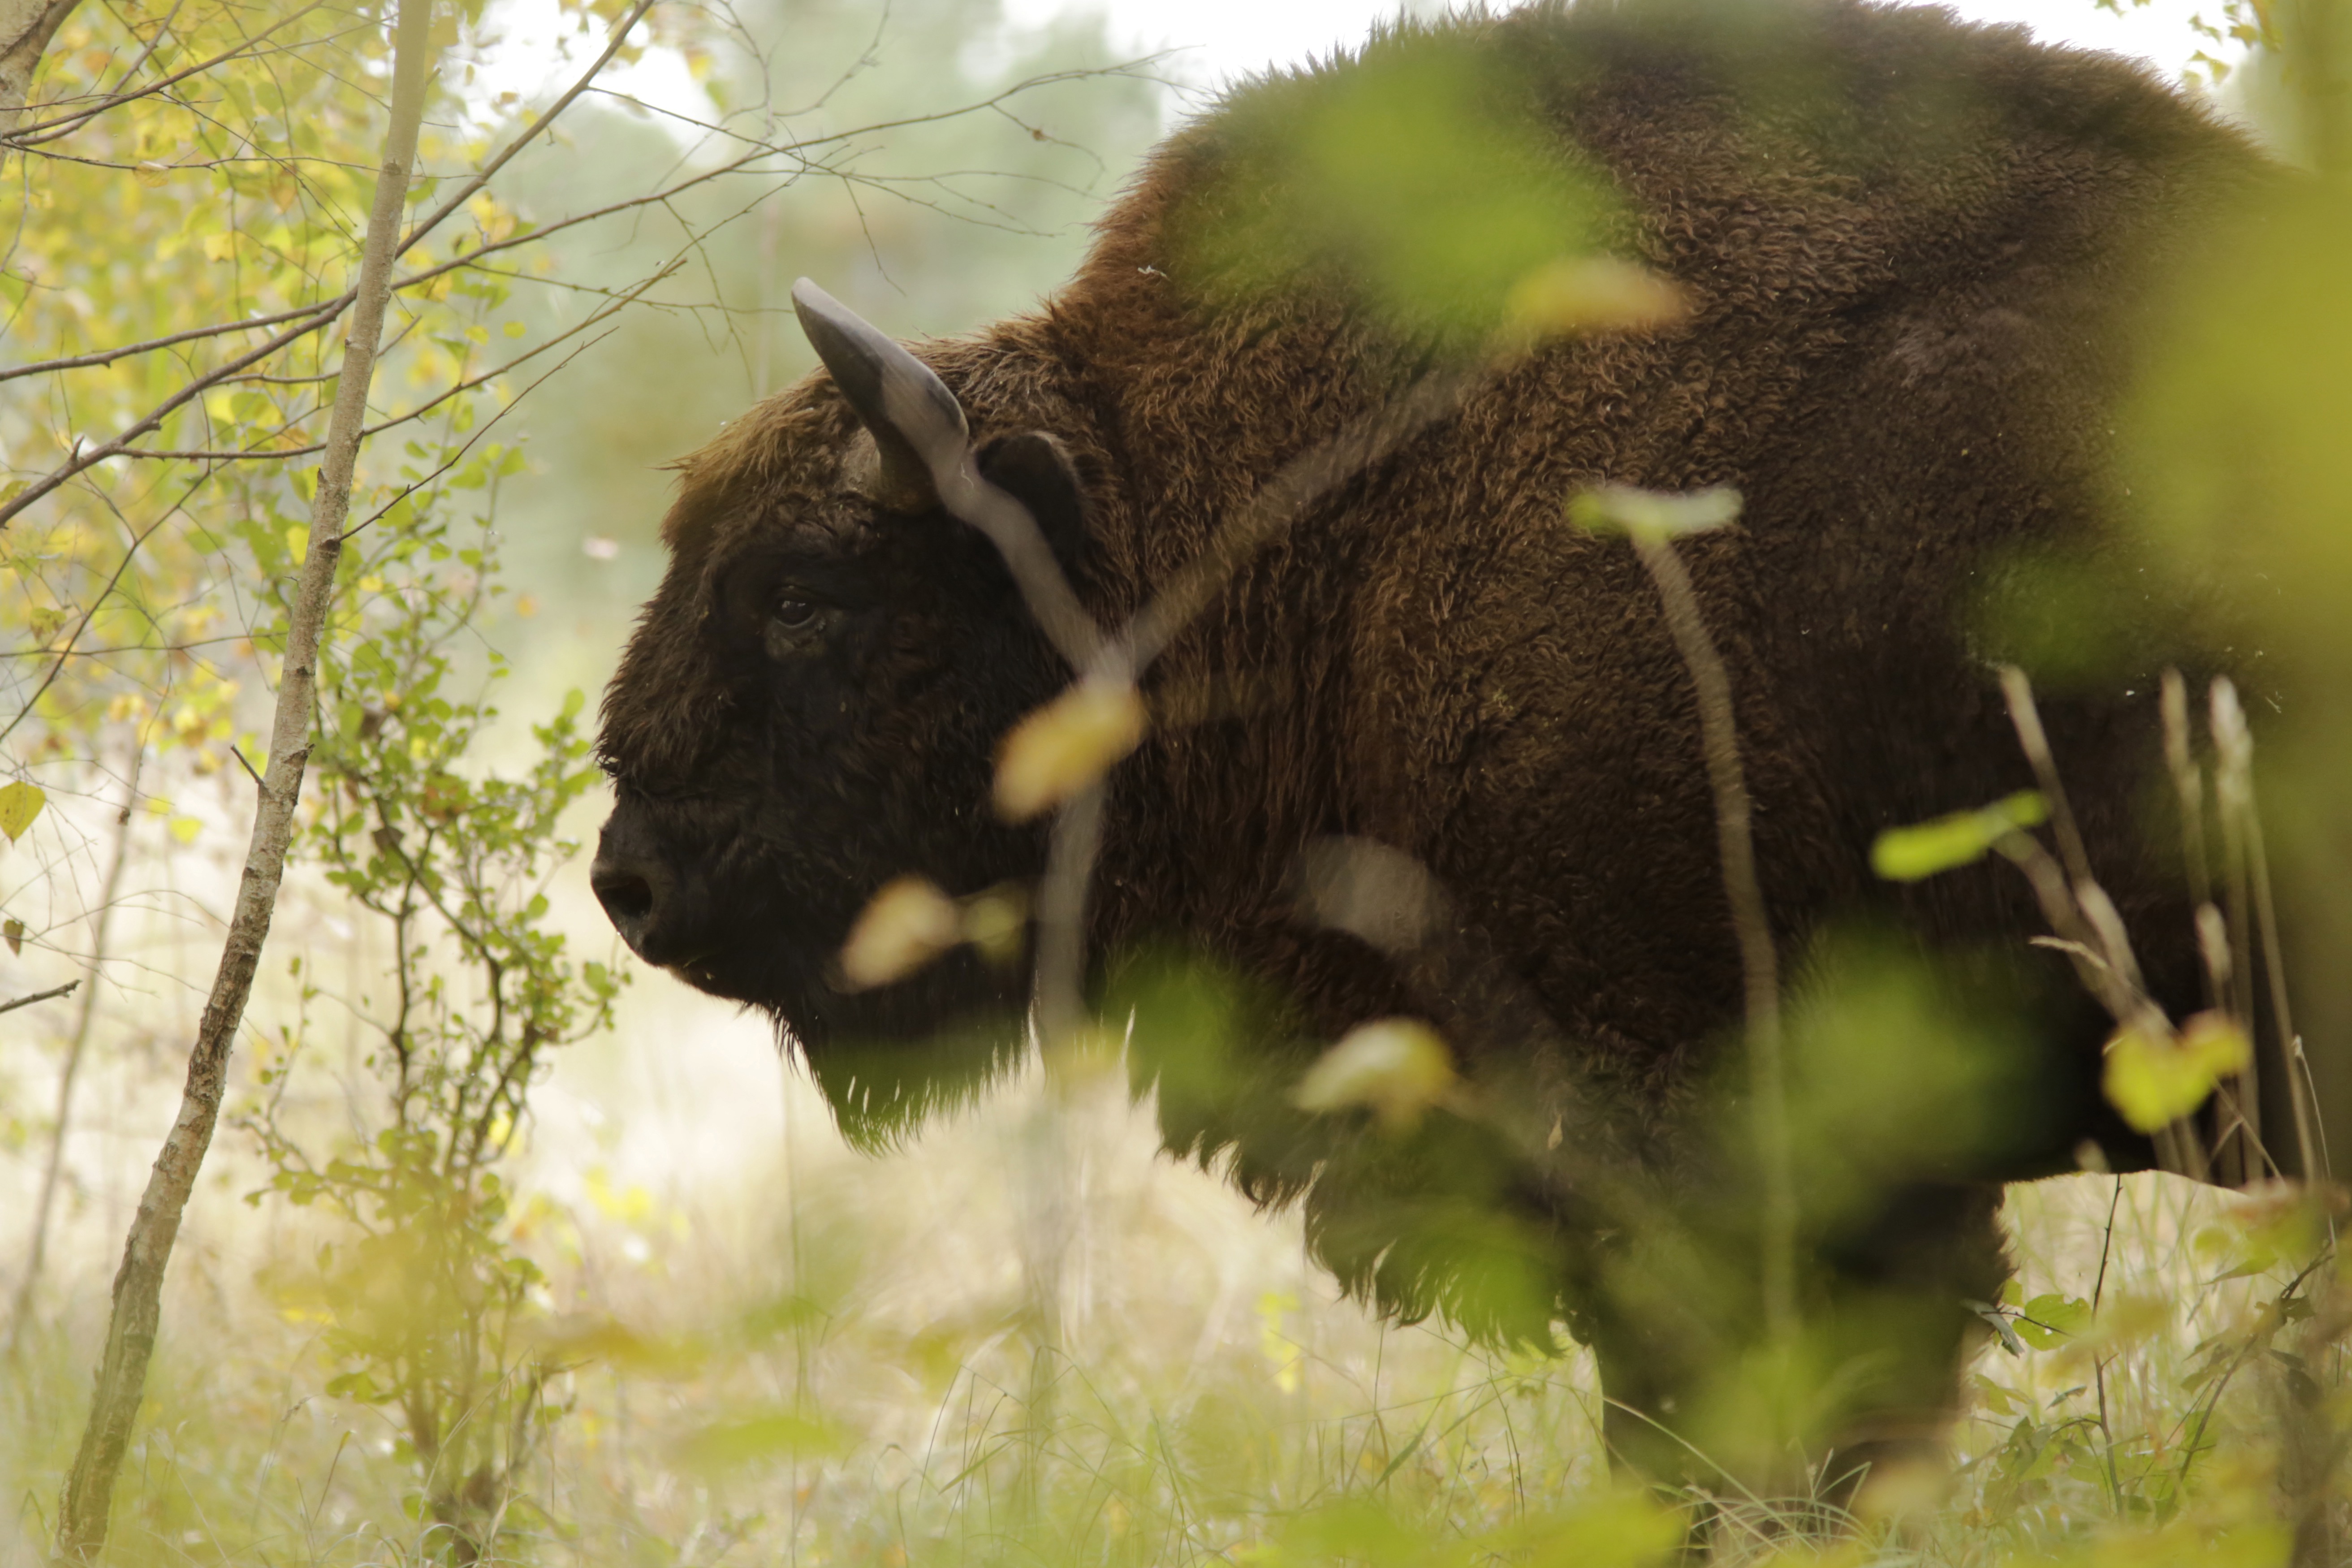 A bison in the wild.